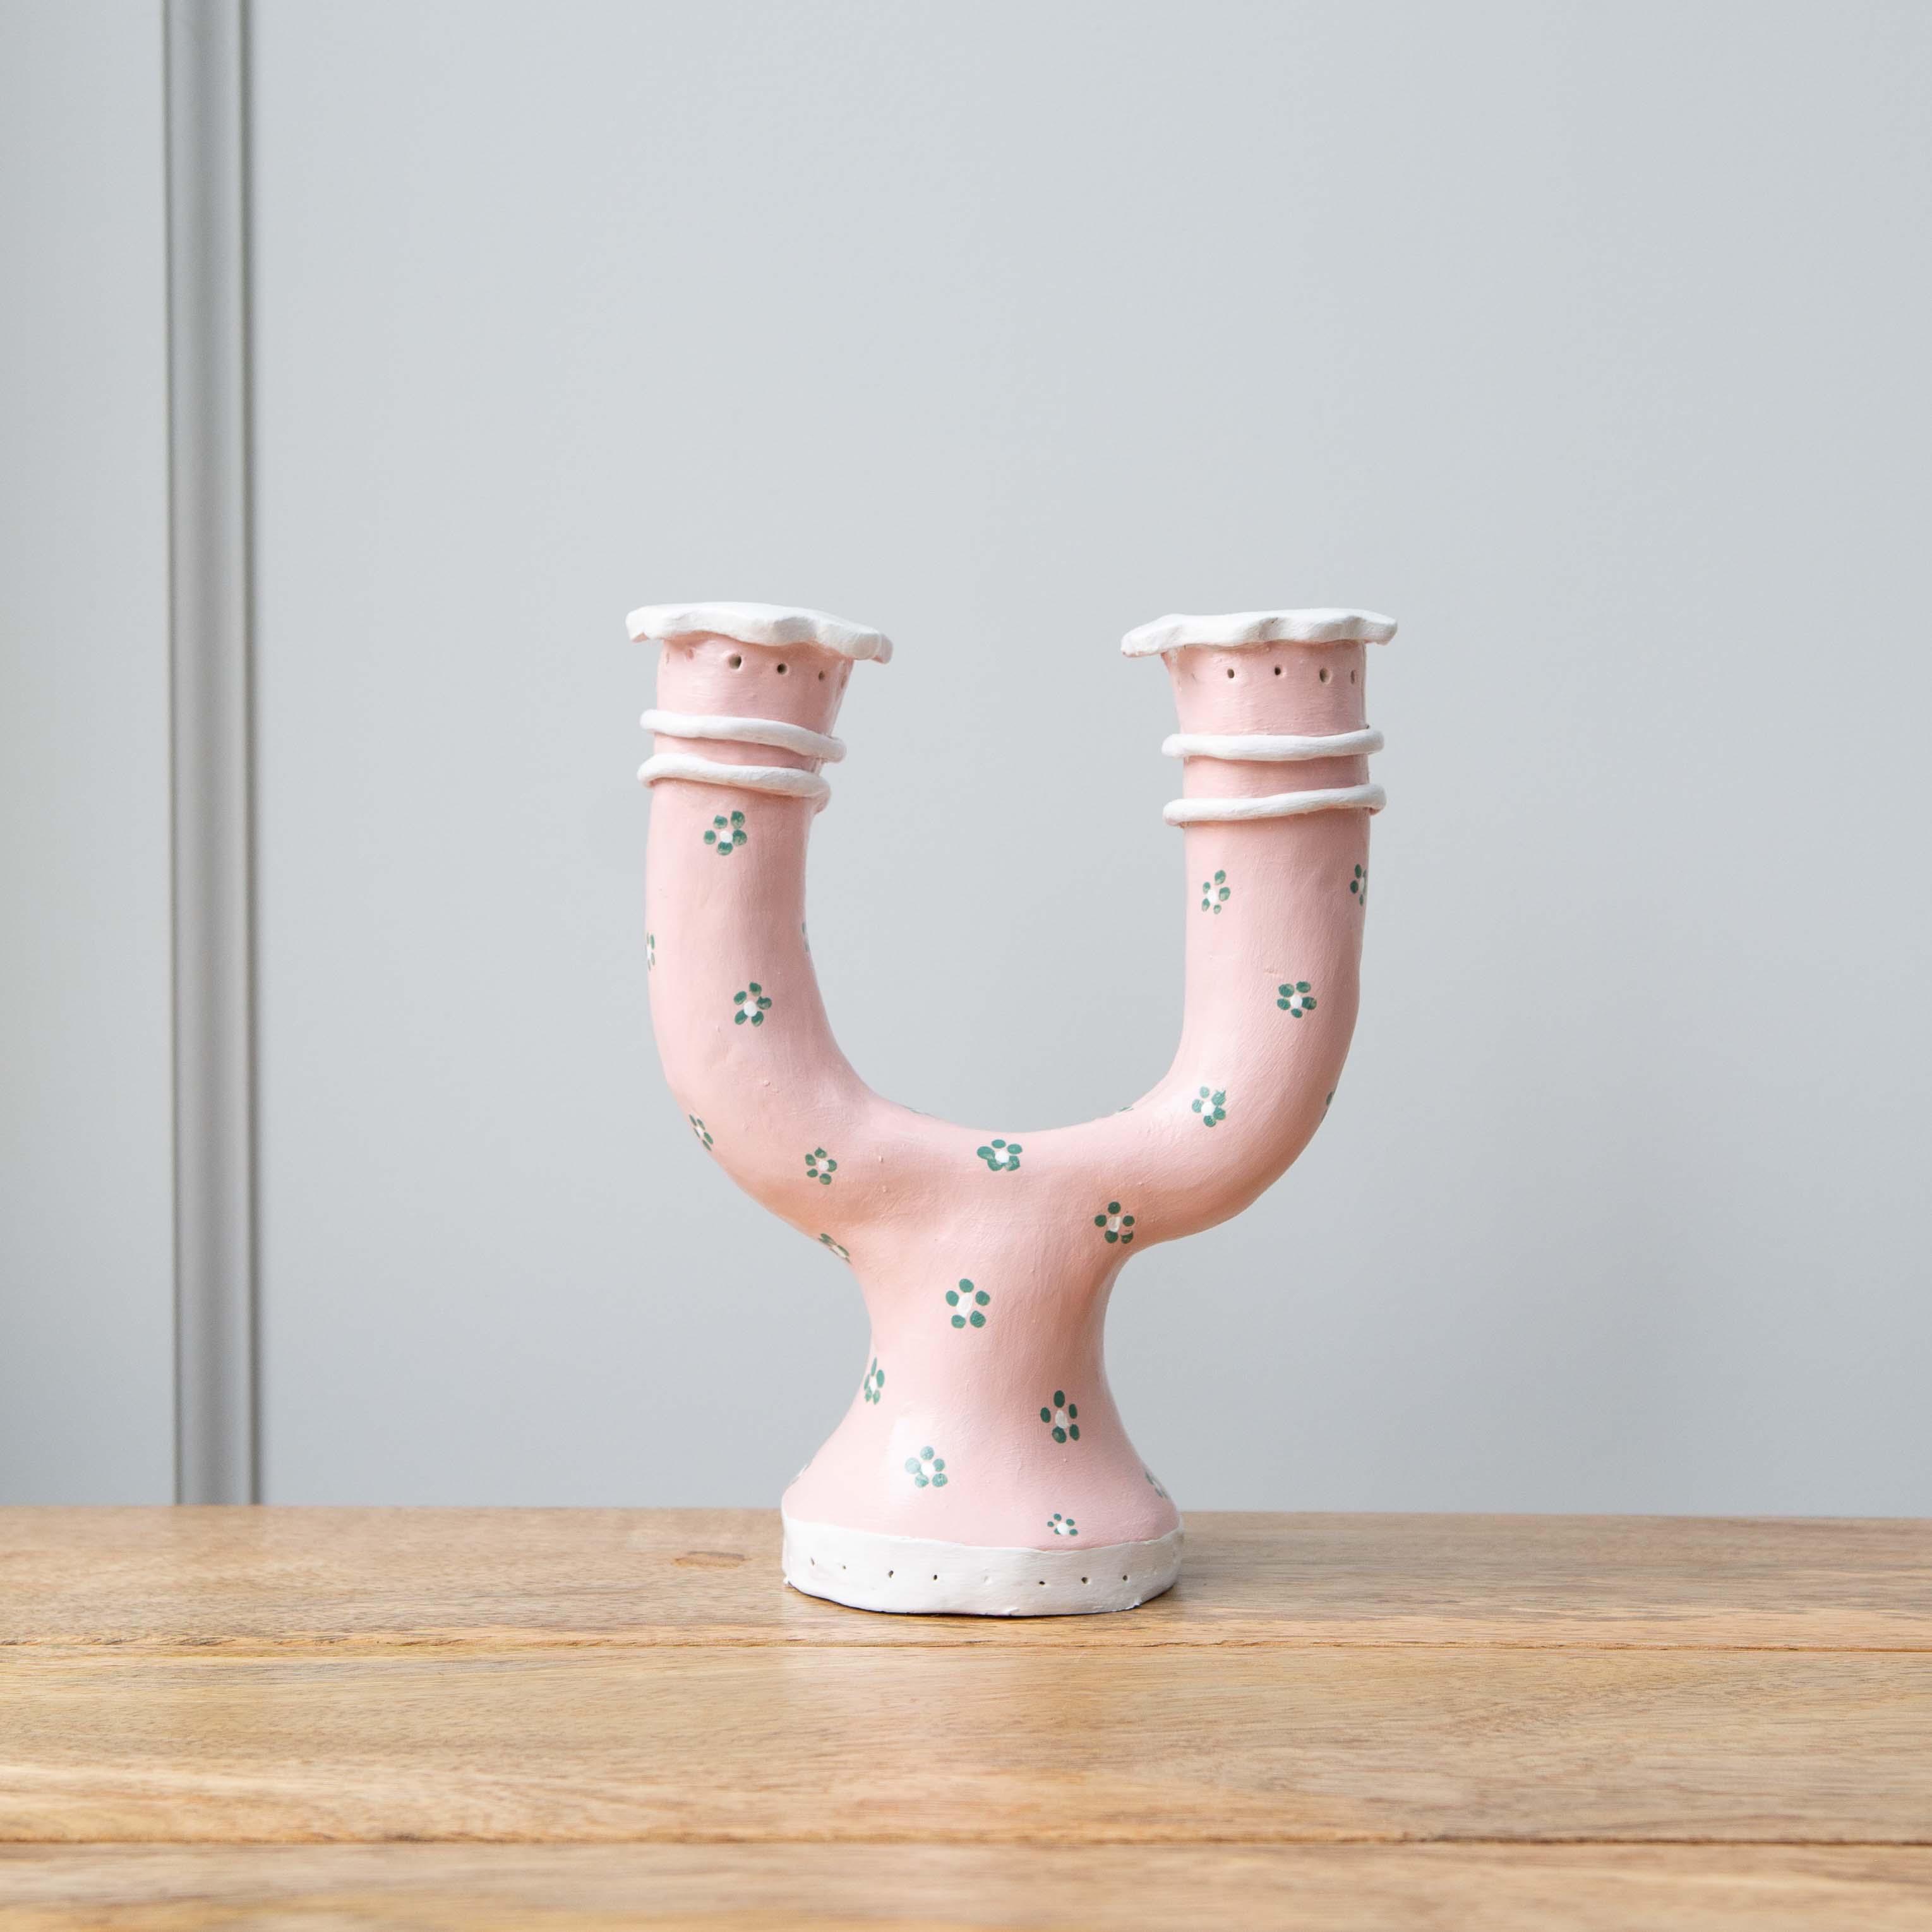 Sculpd Home Pottery Kit: Duo Candelabra